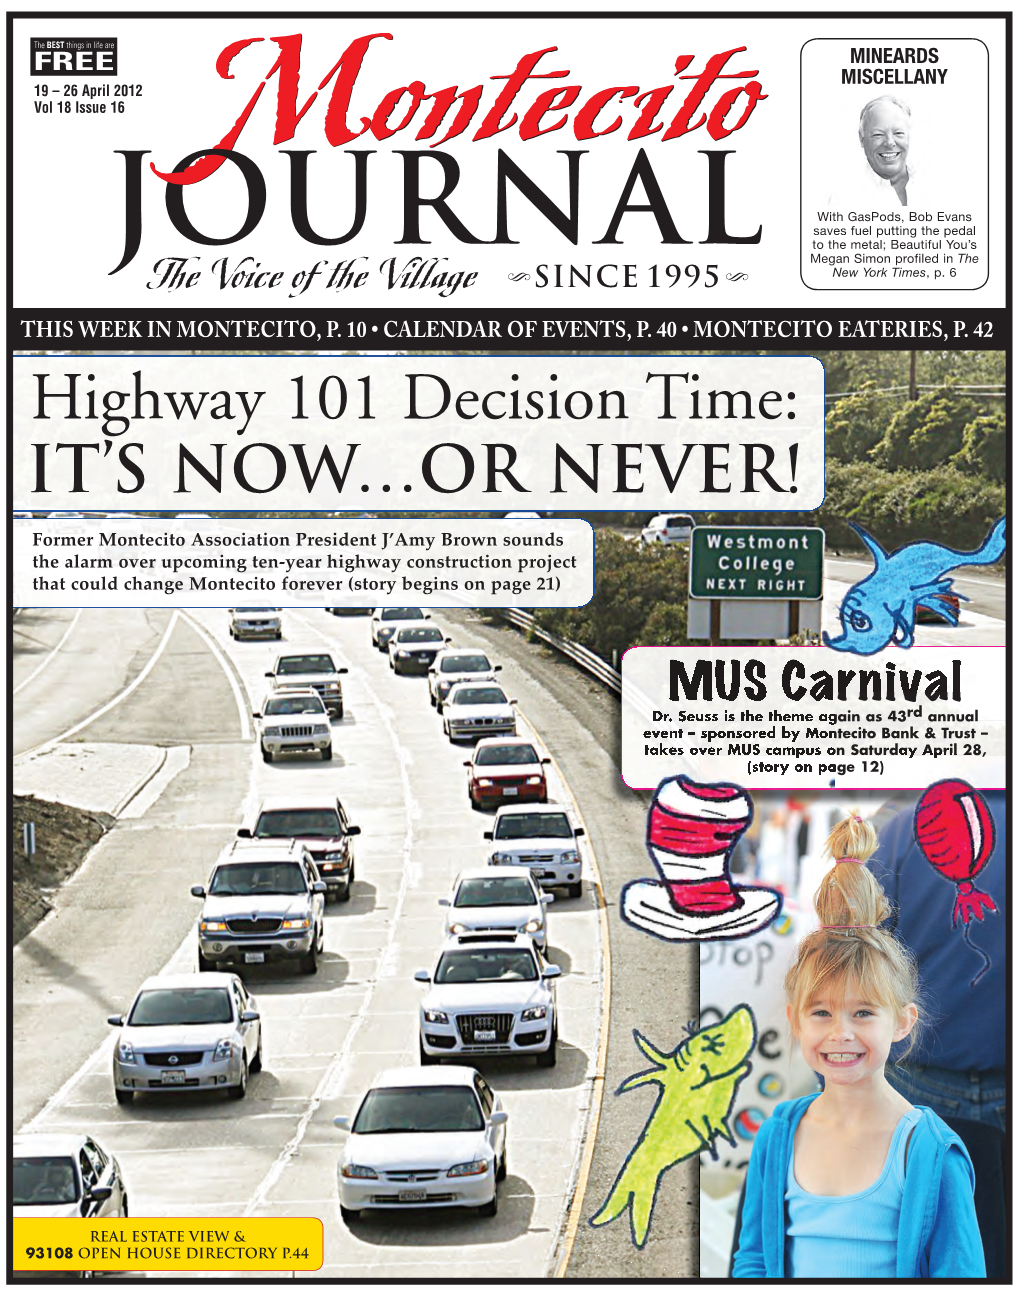 Highway 101 Decision Time: IT’S NOW…OR NEVER!